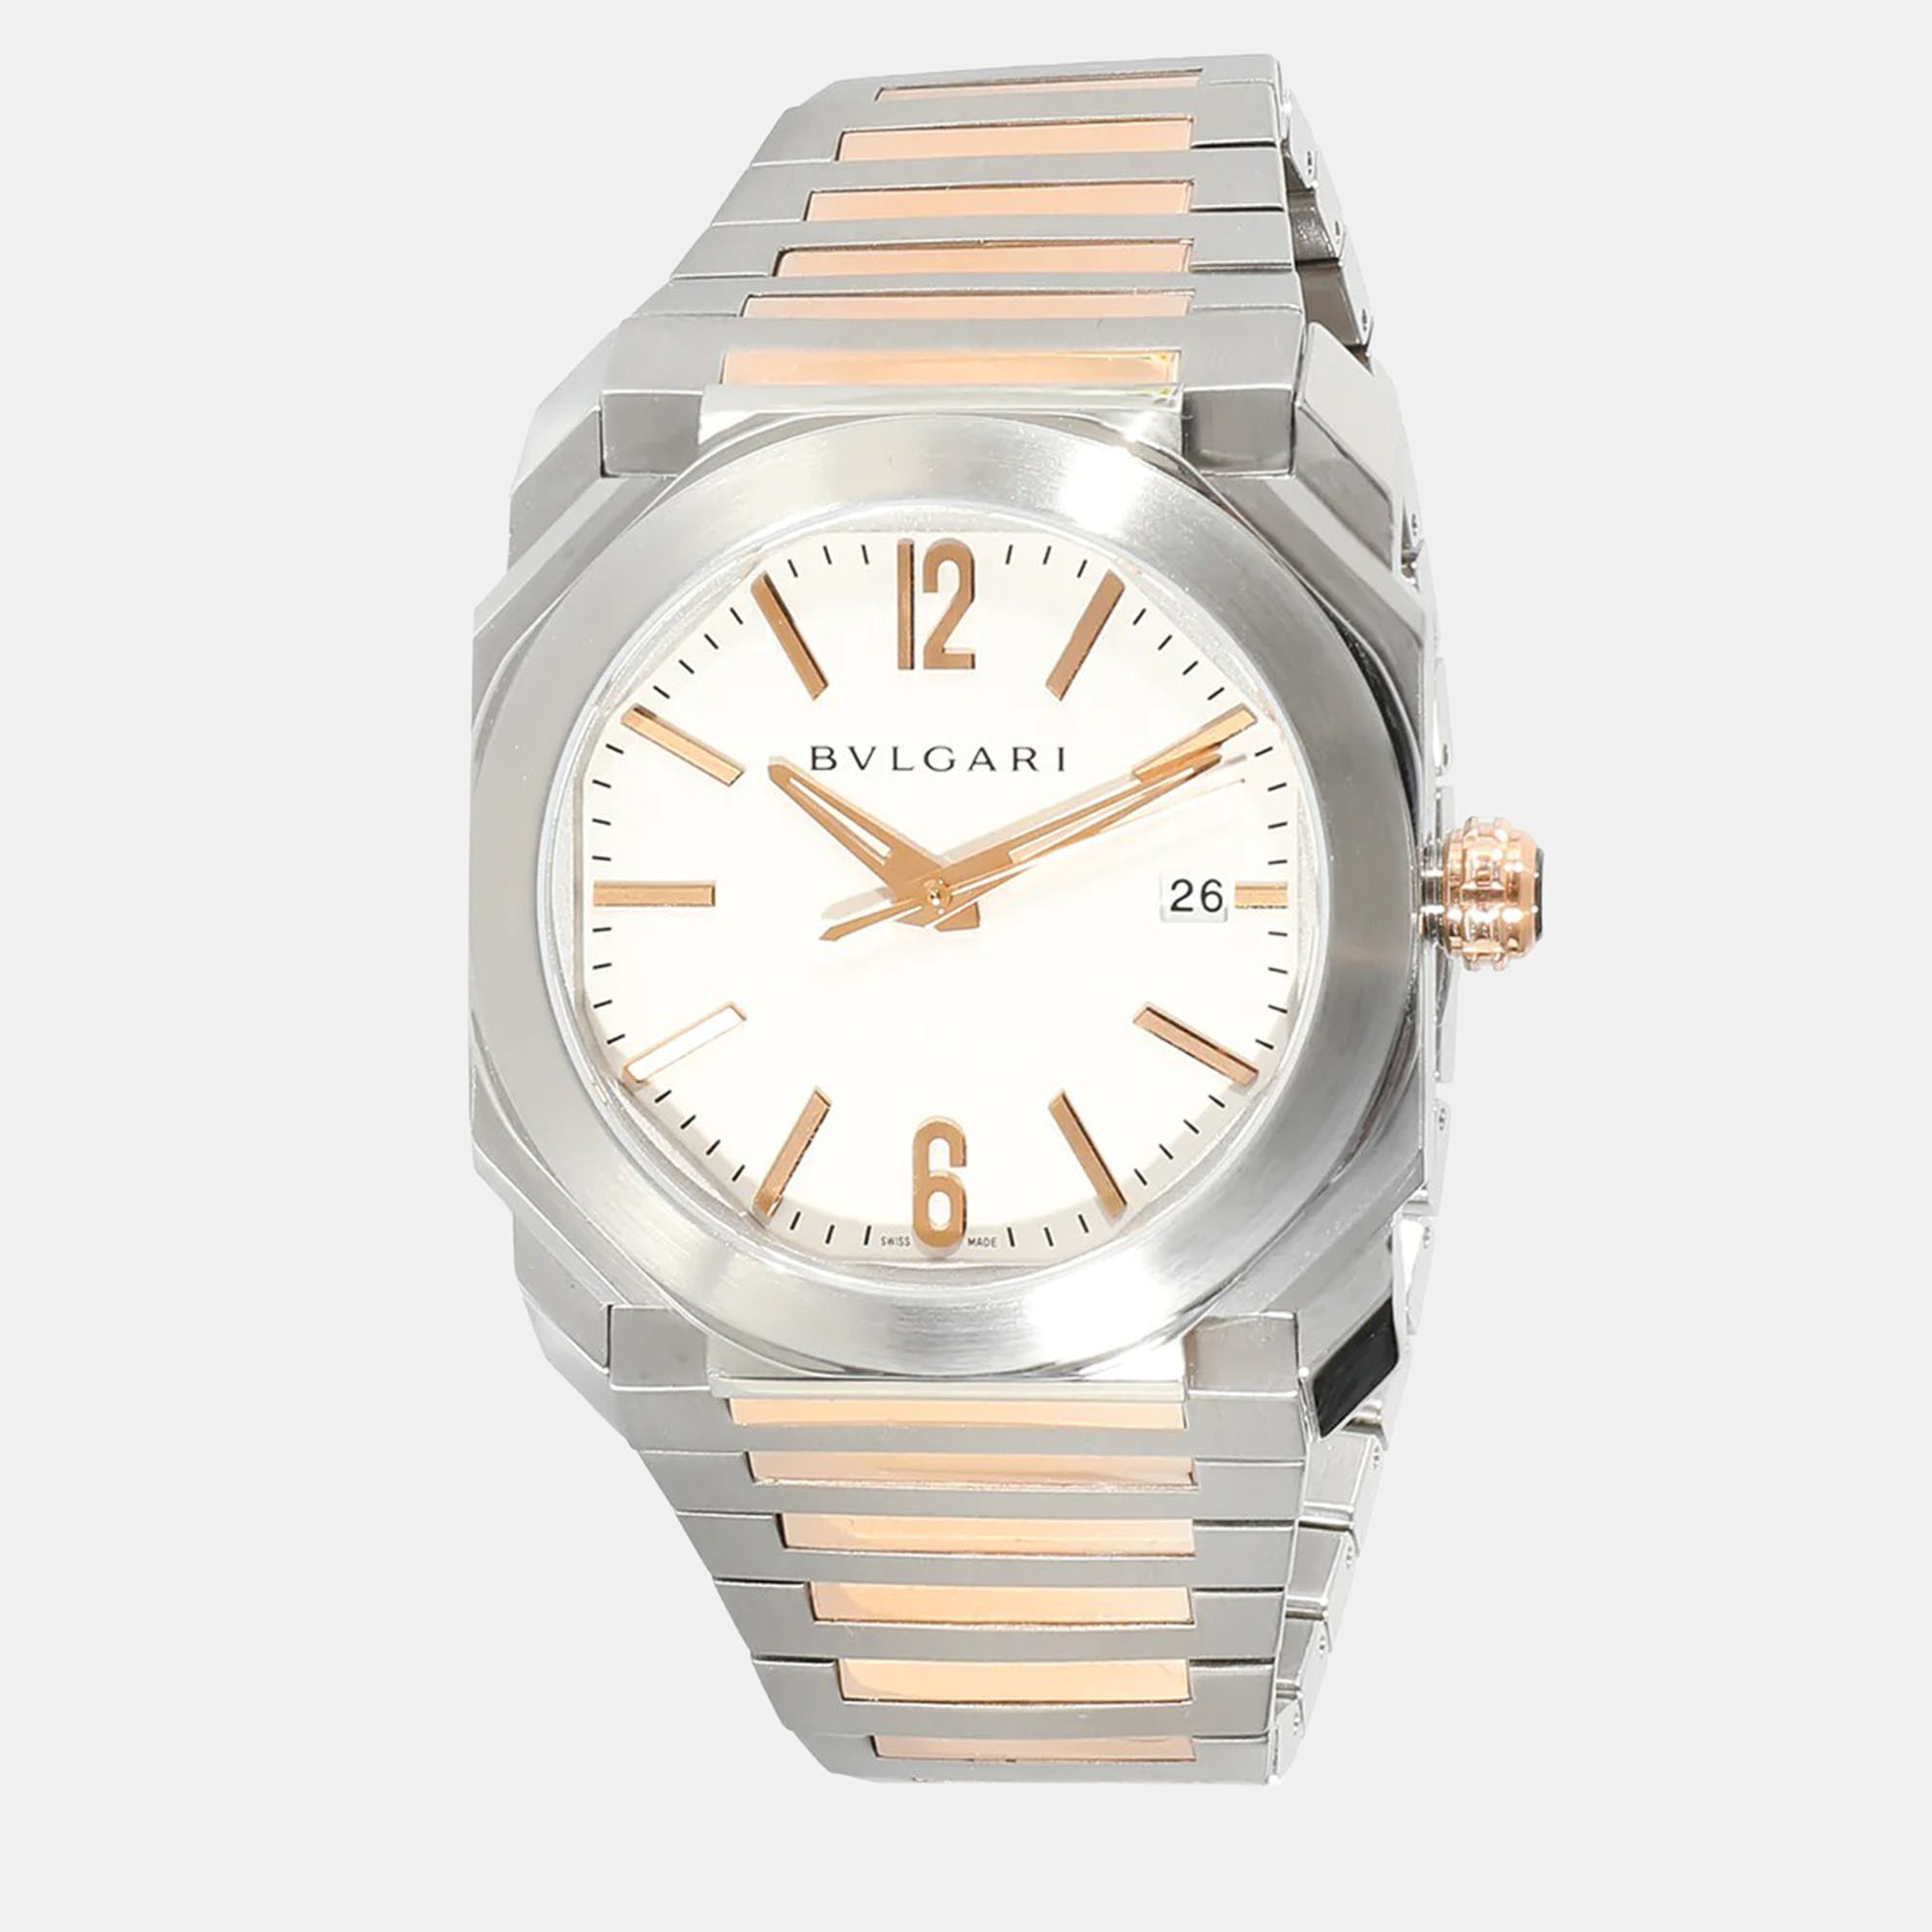 Let this fine Bvlgari wristwatch accompany you with ease and luxurious style. Beautifully crafted using the best quality materials this authentic branded watch is built to be a standout accessory for your wrist.